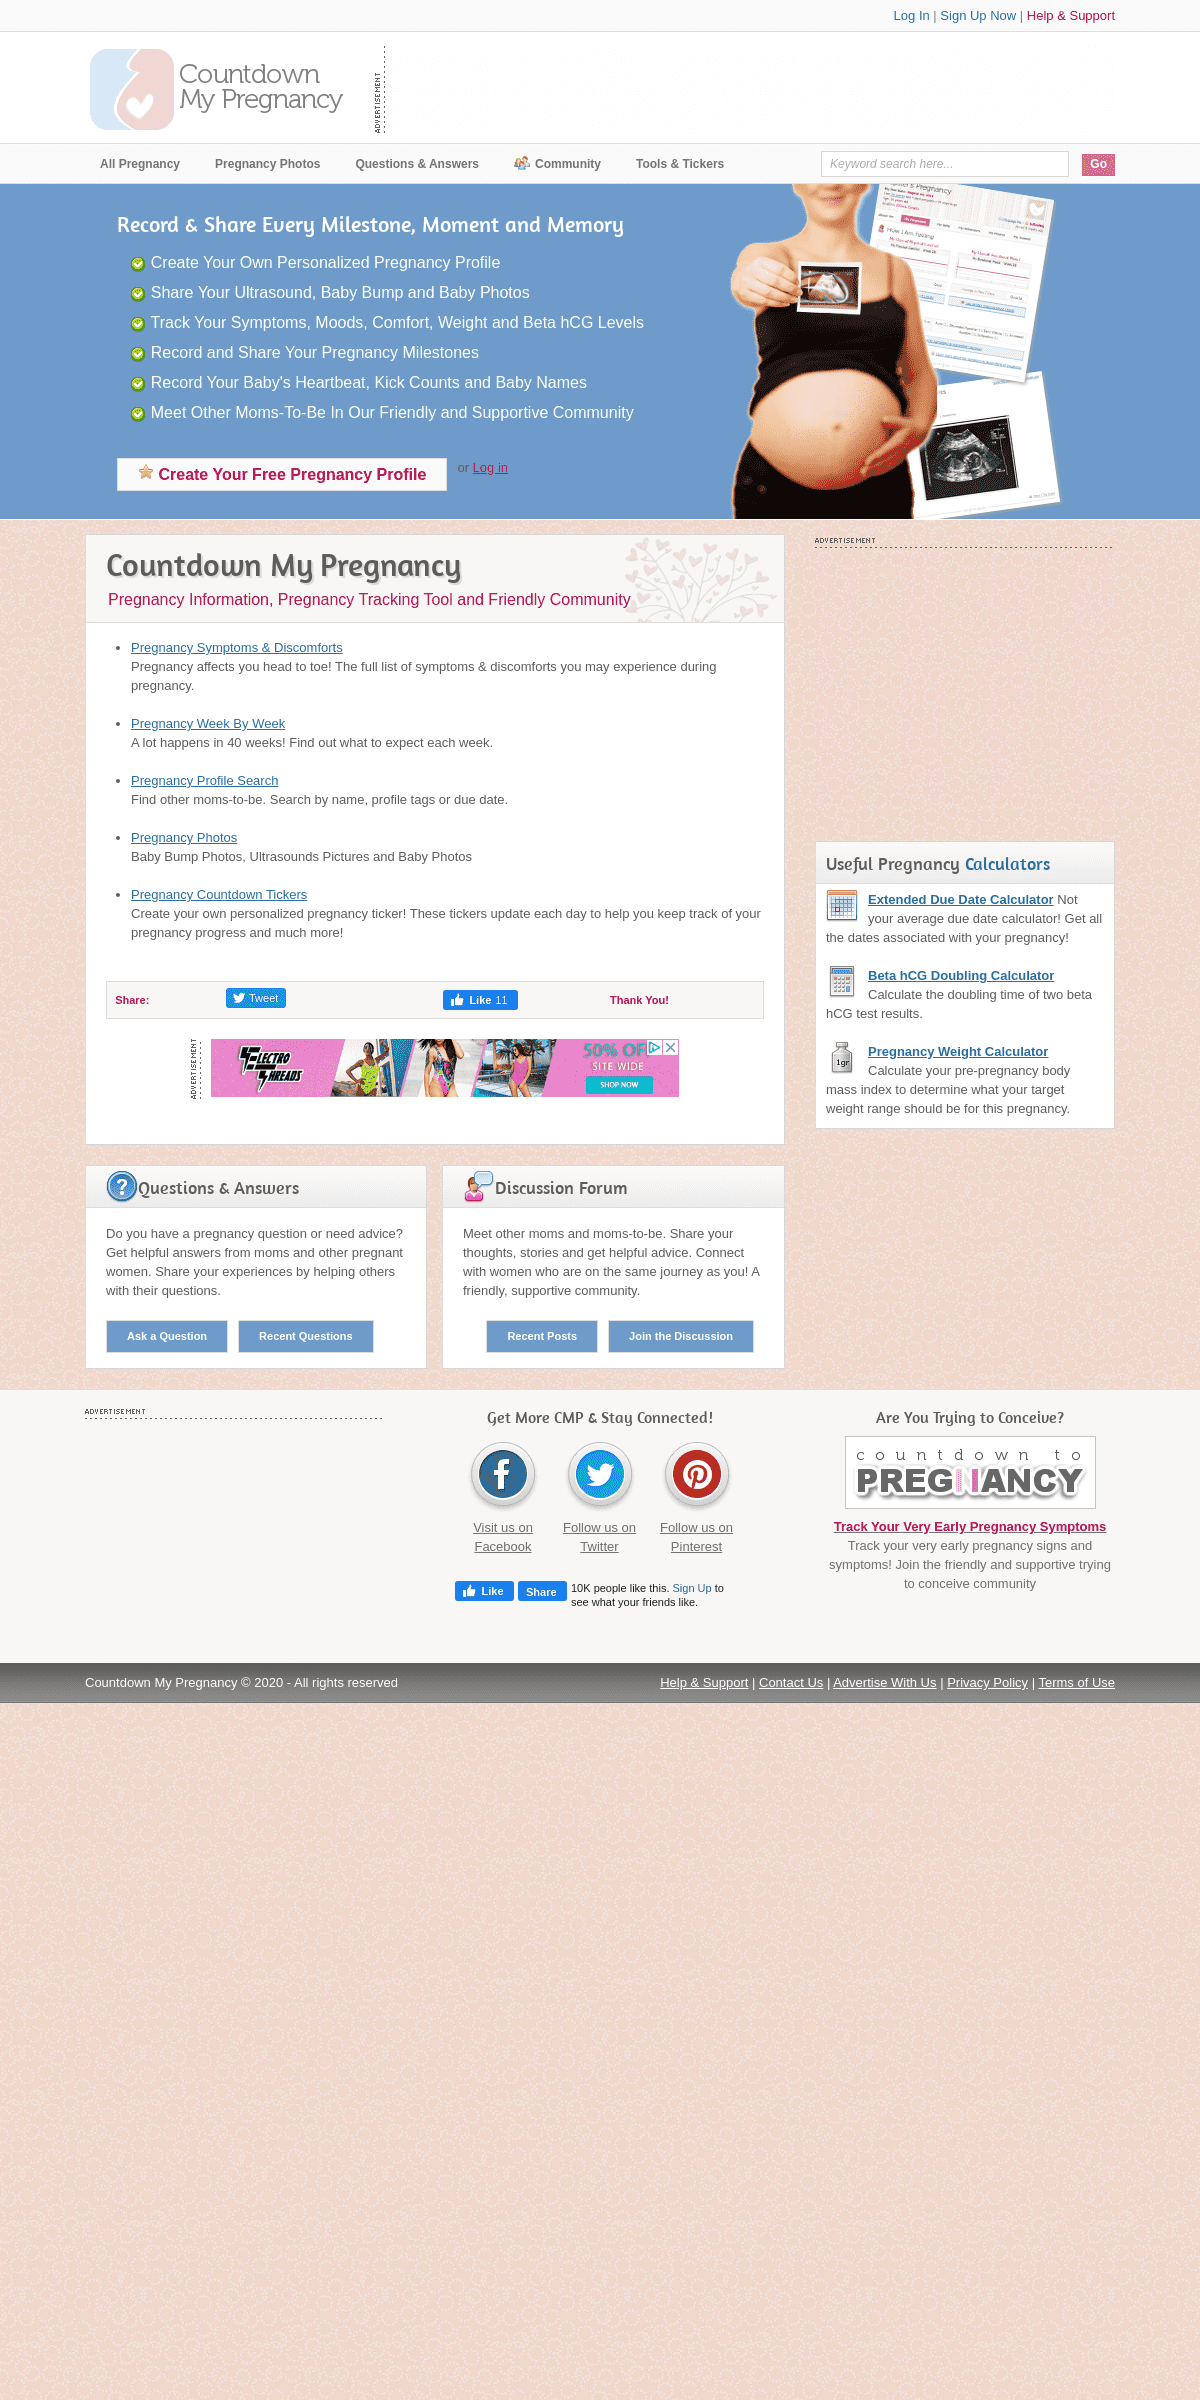 A complete backup of countdownmypregnancy.com